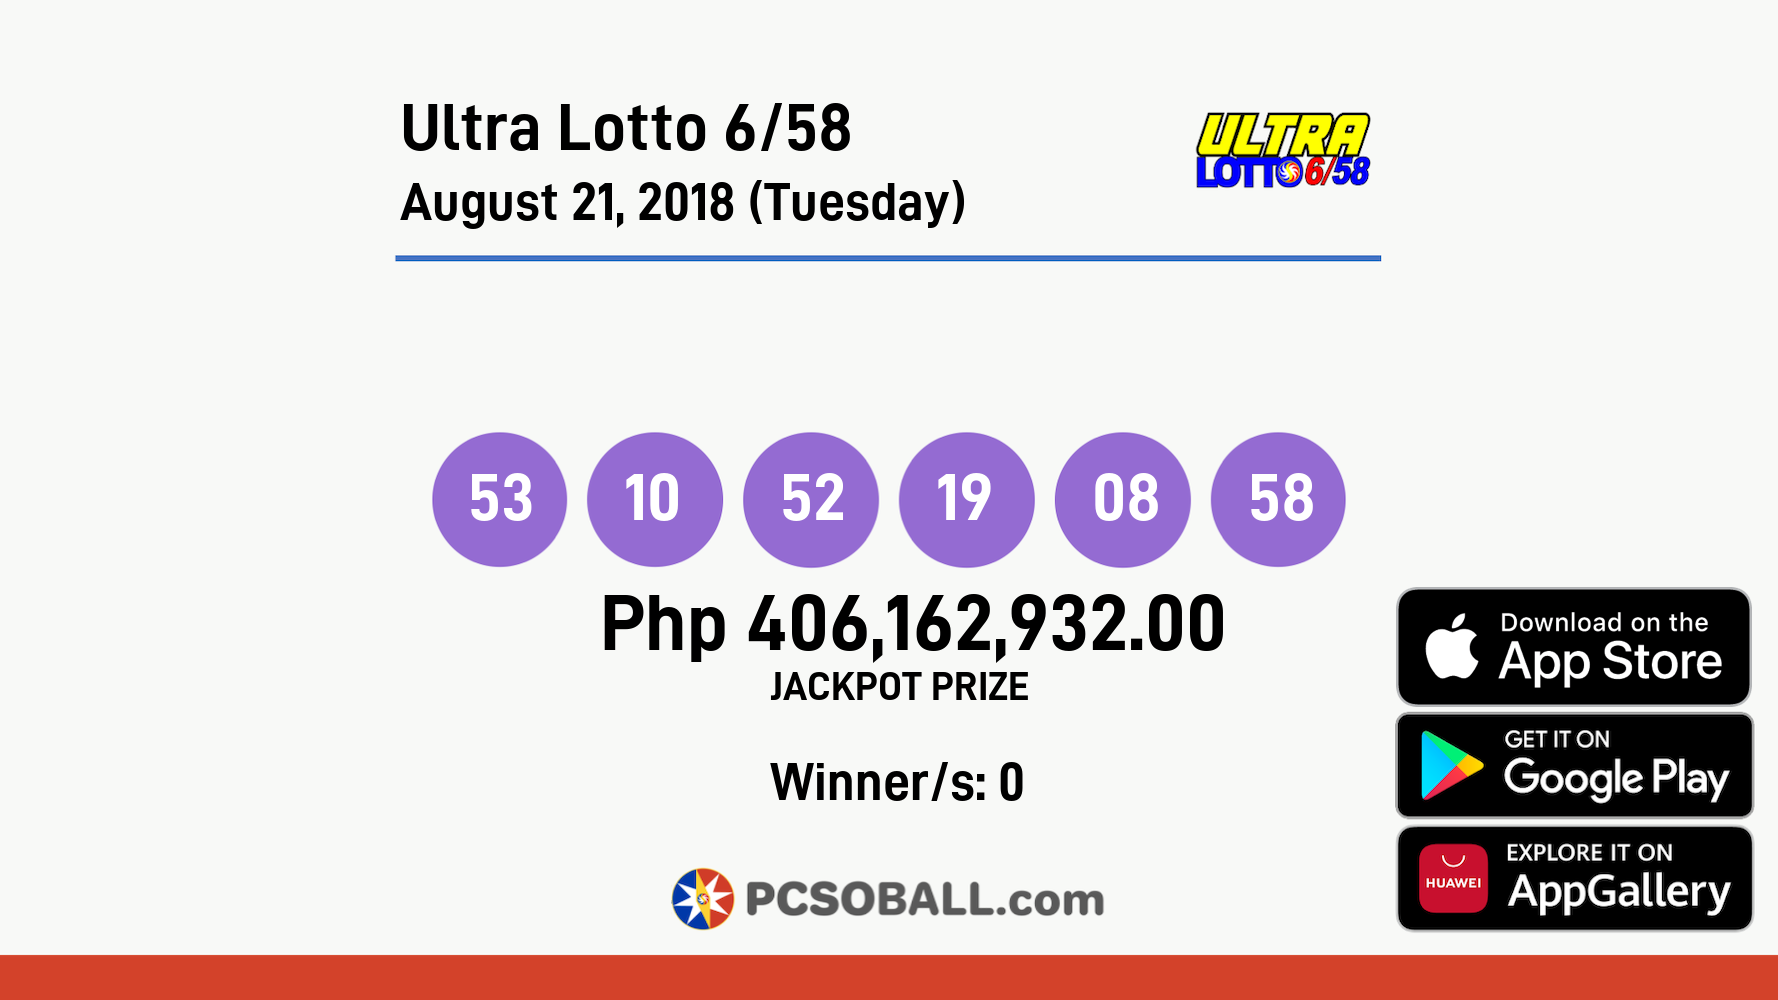 Ultra Lotto 6/58 August 21, 2018 (Tuesday) Result